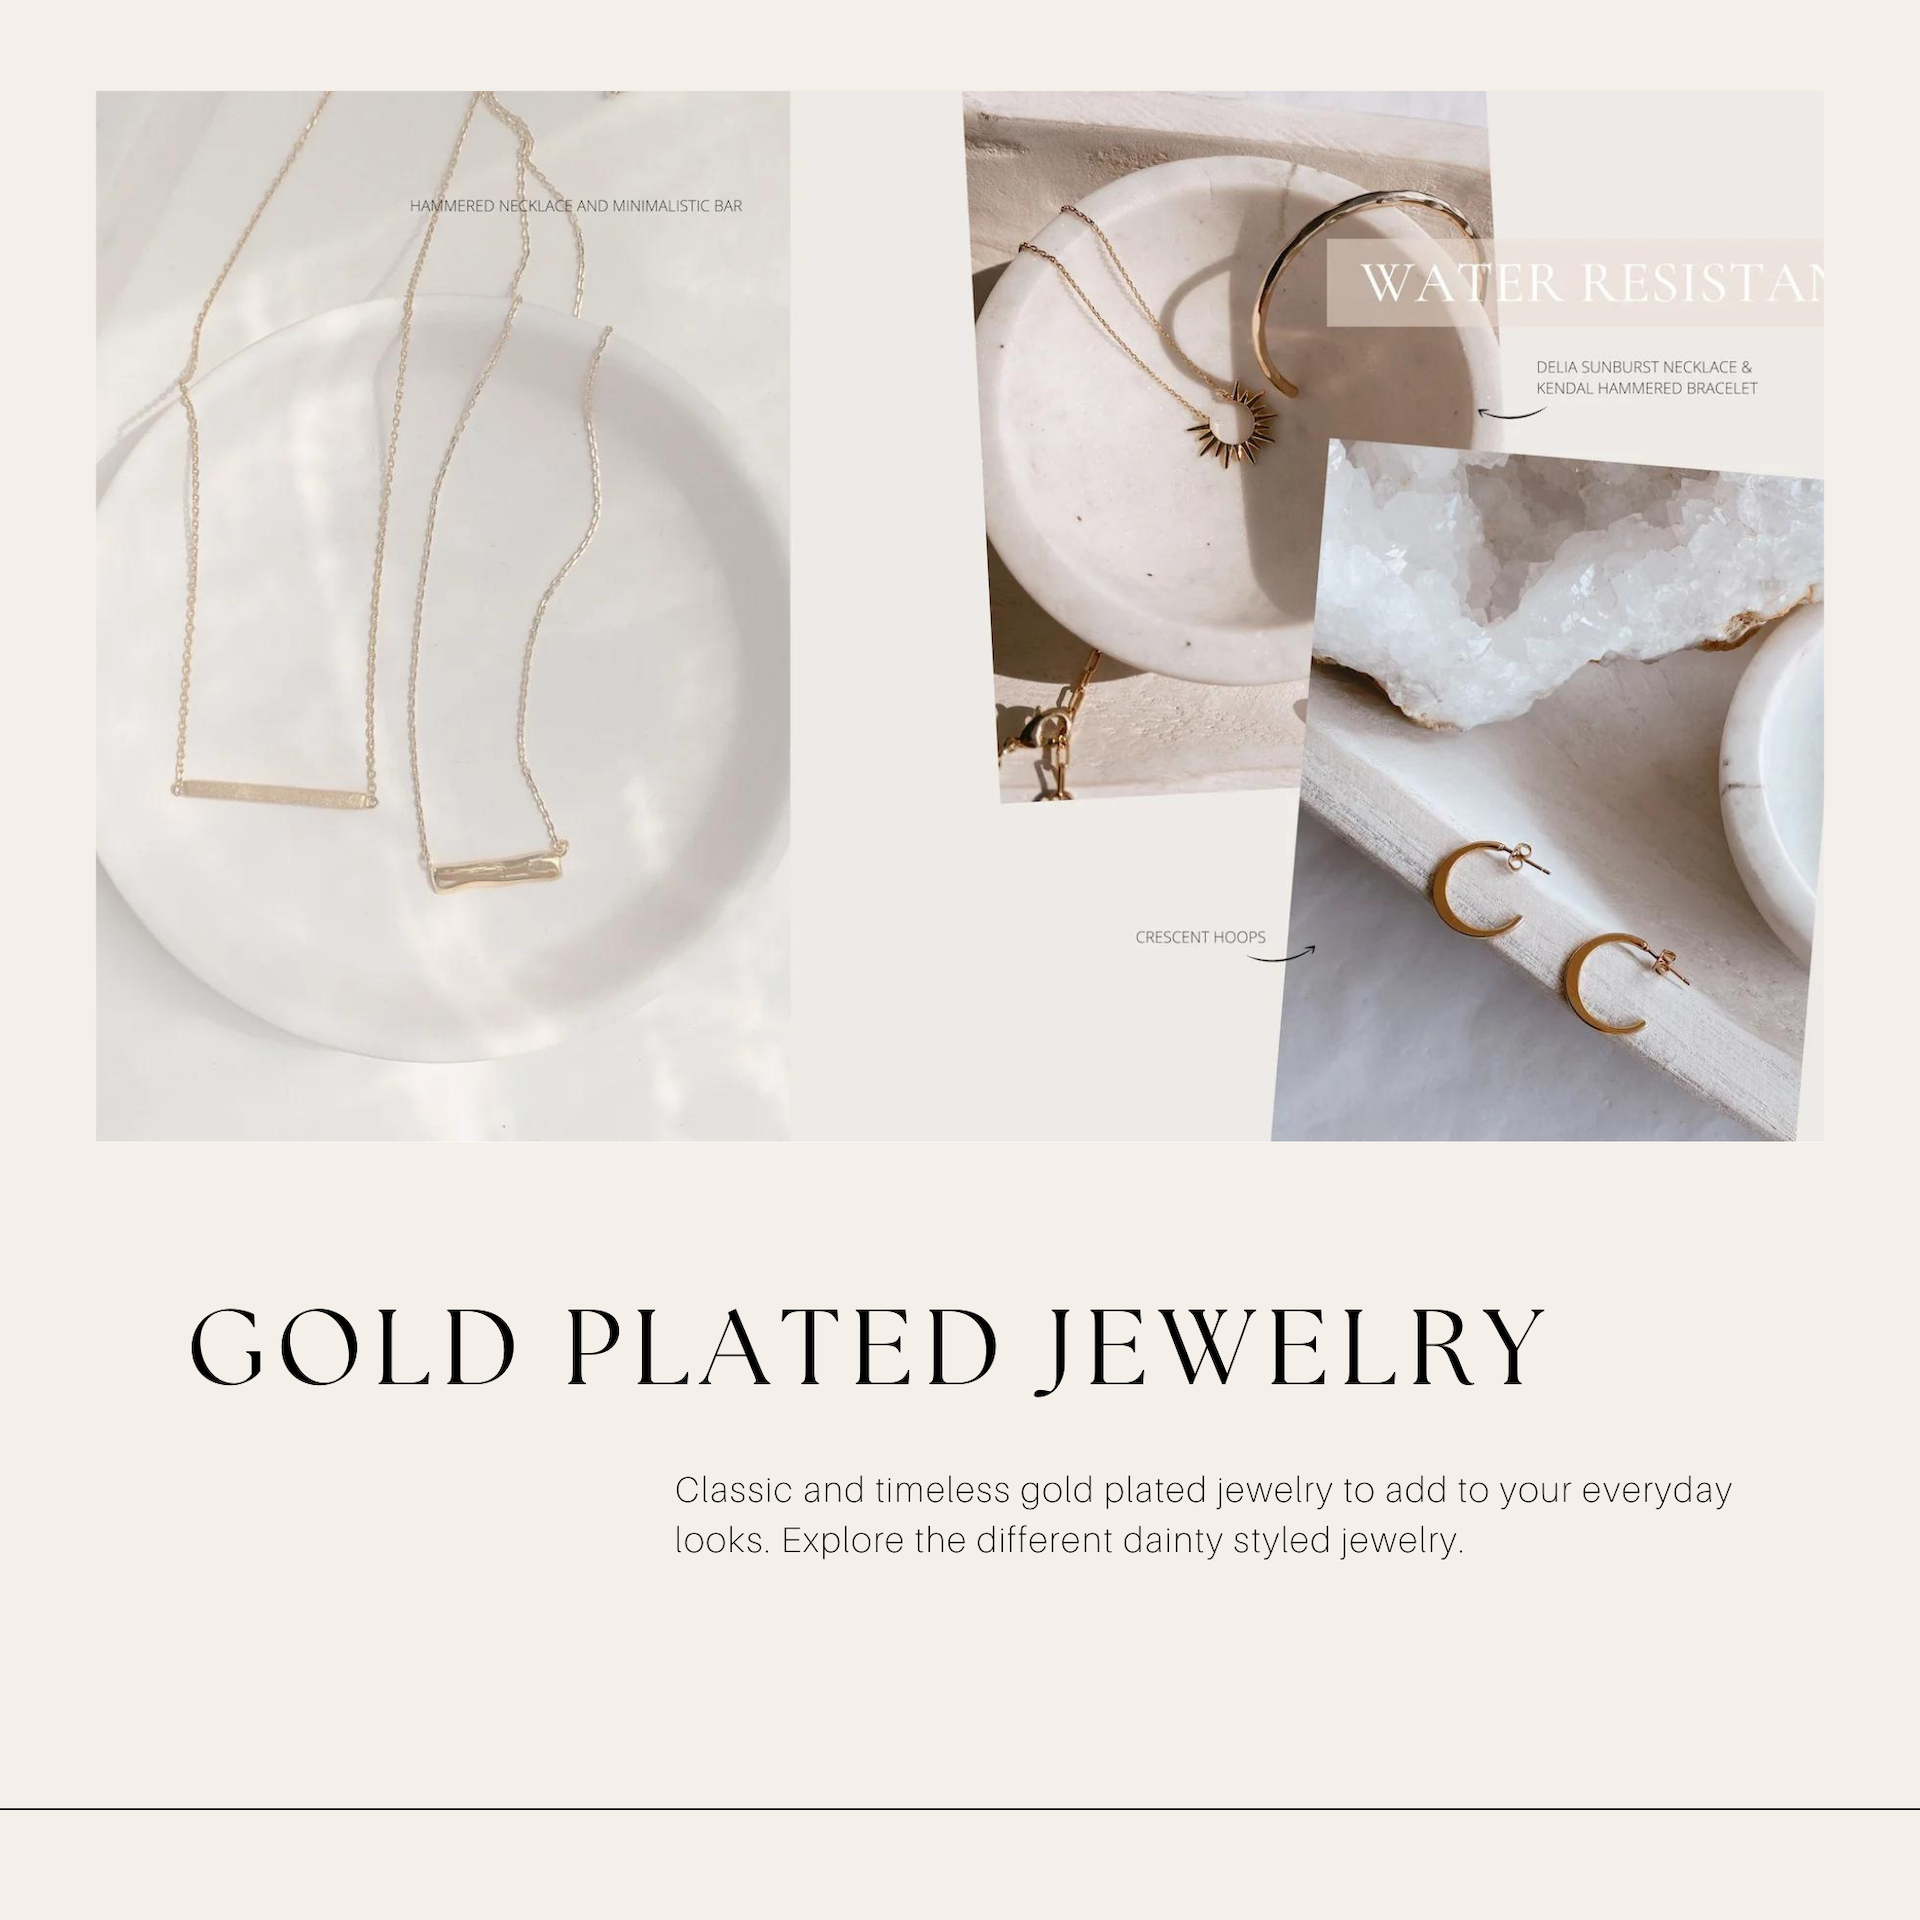 Summer Must Have - Minimalistic Water Resistant Jewelry